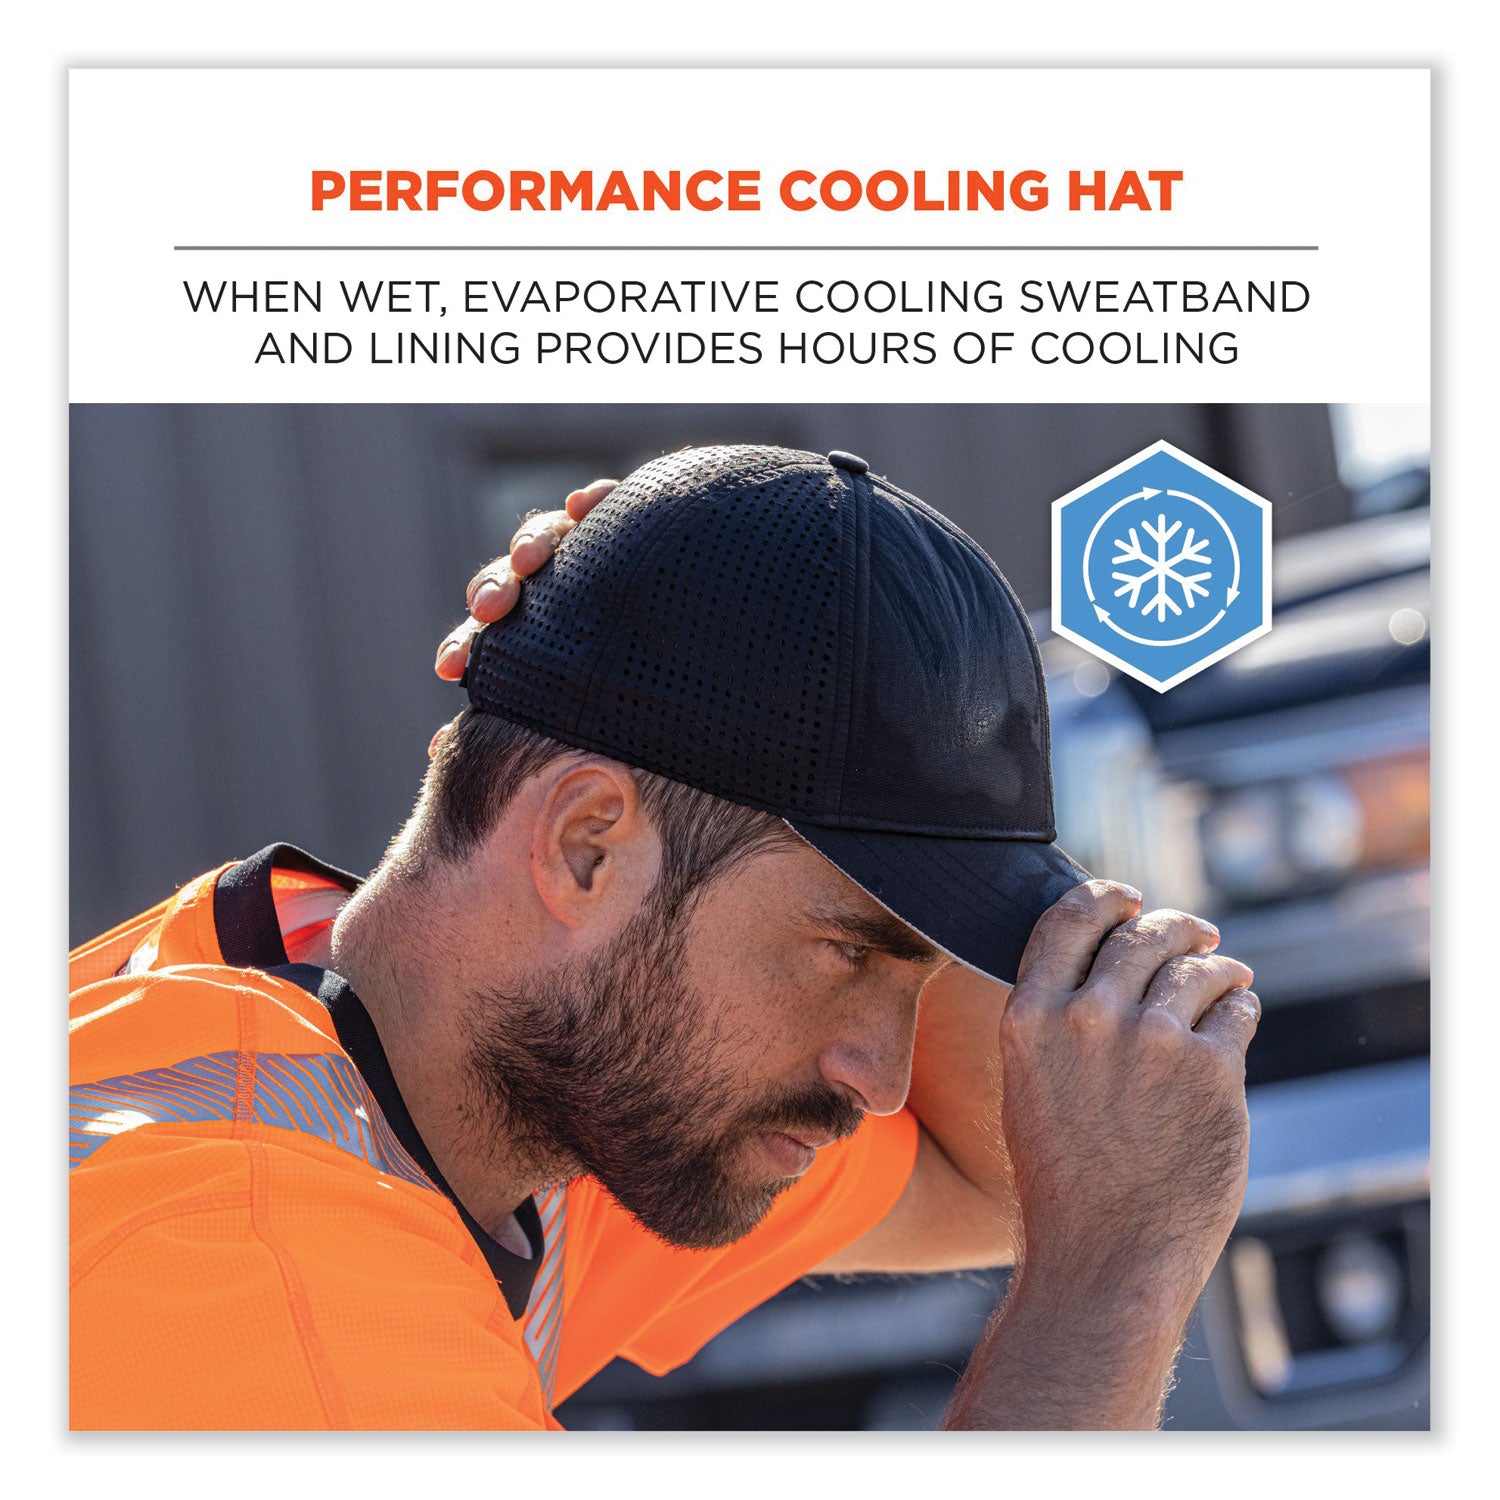 chill-its-8937-performance-cooling-baseball-hat-one-size-fits-most-black-ships-in-1-3-business-days_ego12604 - 2